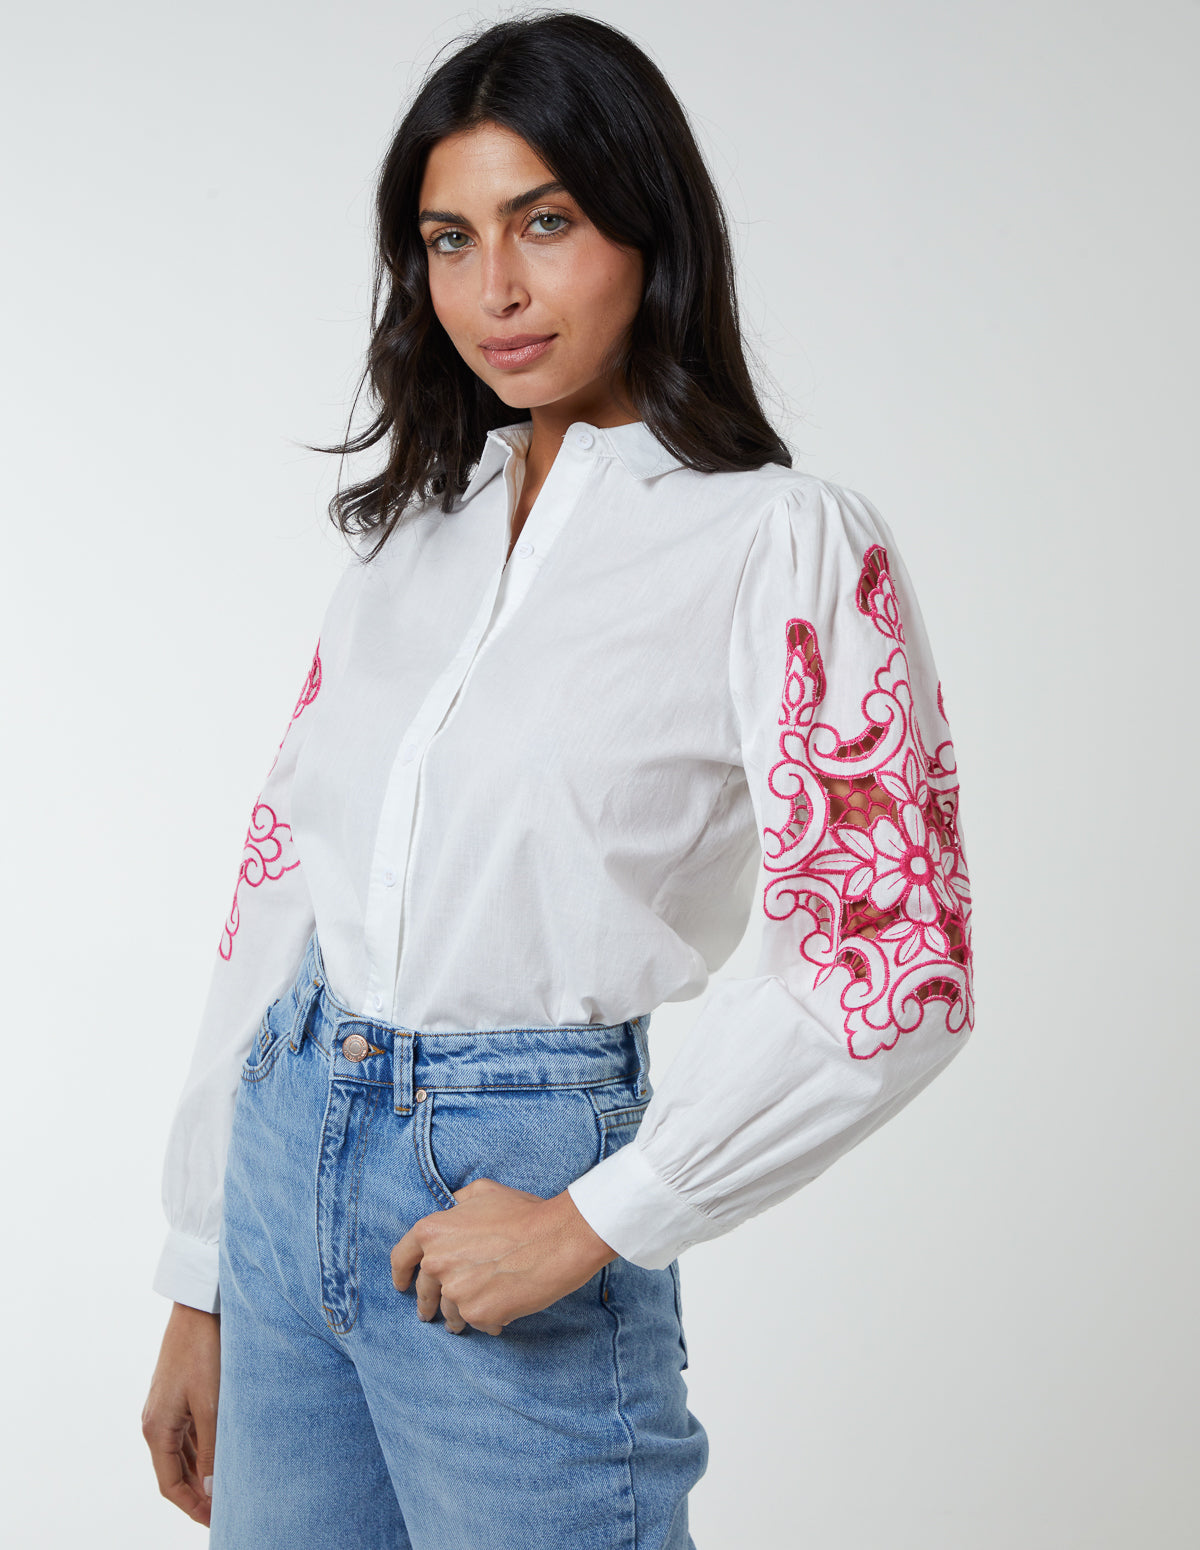 Embroidery Sleeve Cut Out Shirt 